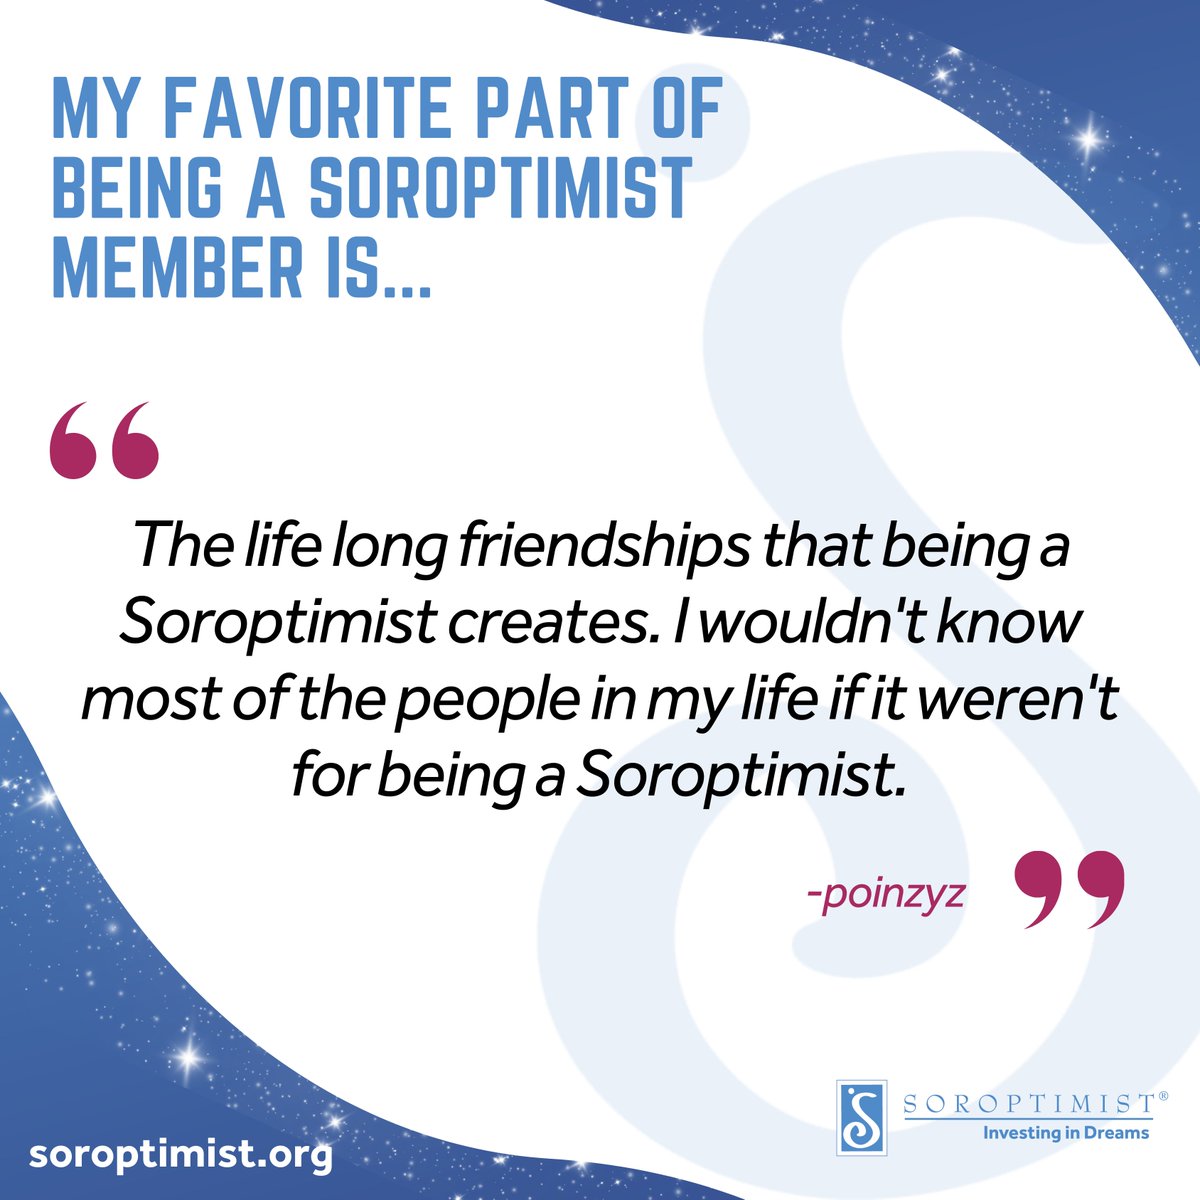 Thank you for sharing why you love being a Soroptimist member! Let us know your favorite part this week for #SIAVolunteerWeek and tag your friends that you've met through Soroptimist 💙